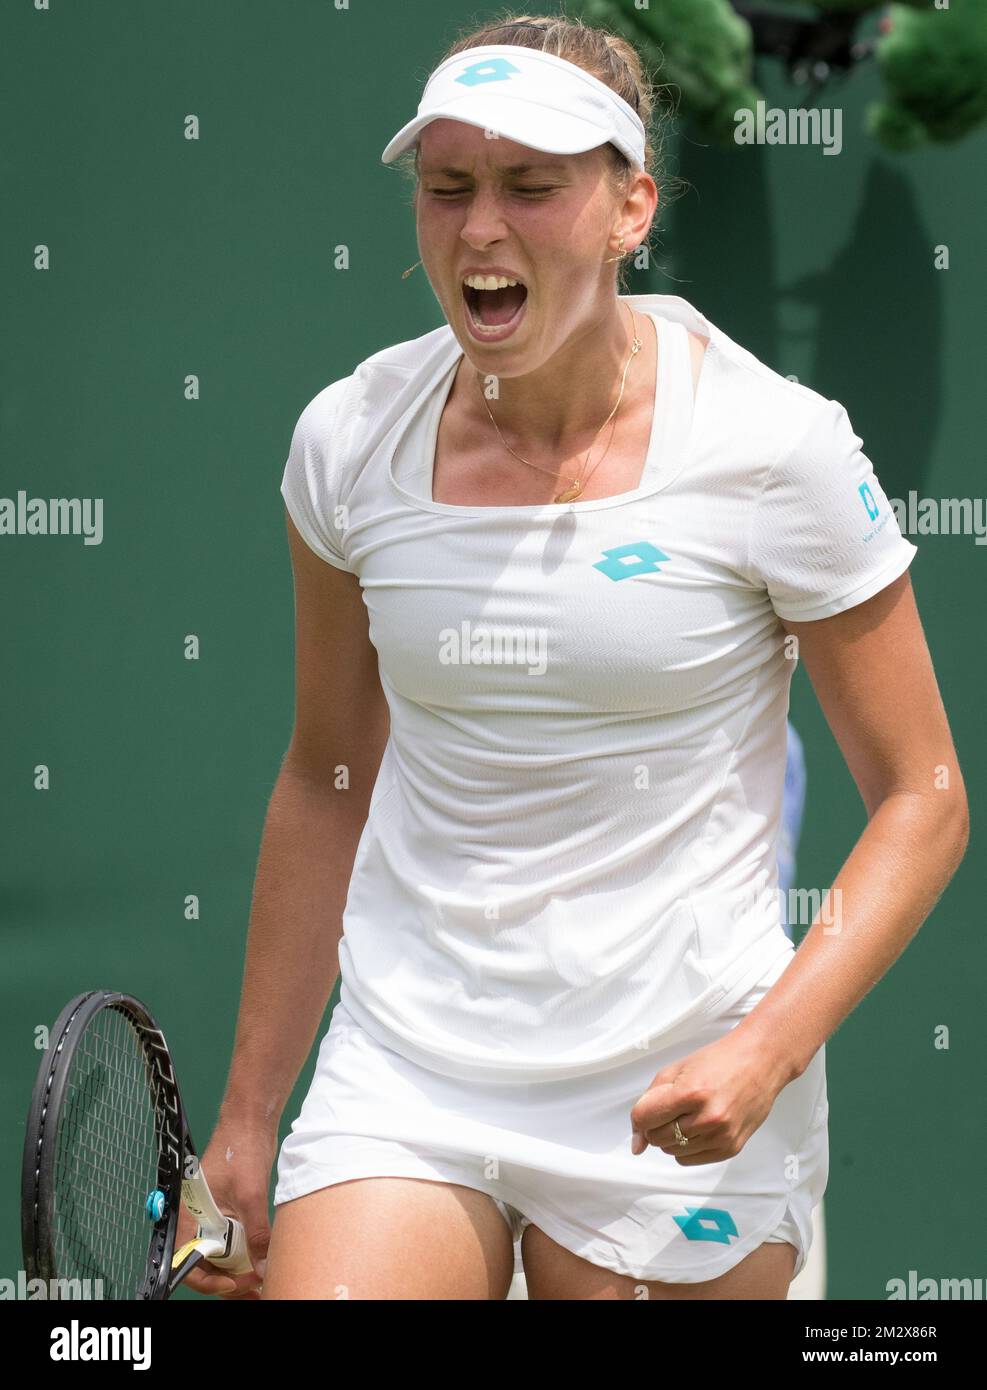 Belgian Elise Mertens (WTA 21) reacts during a tennis match against Chinese Wang Qiang (WTA 15) in the third round of the women's singles at the 2019 Wimbledon grand slam tennis tournament at the All England Tennis Club, in south-west London, Britain, Saturday 06 July 2019. BELGA PHOTO BENOIT DOPPAGNE  Stock Photo